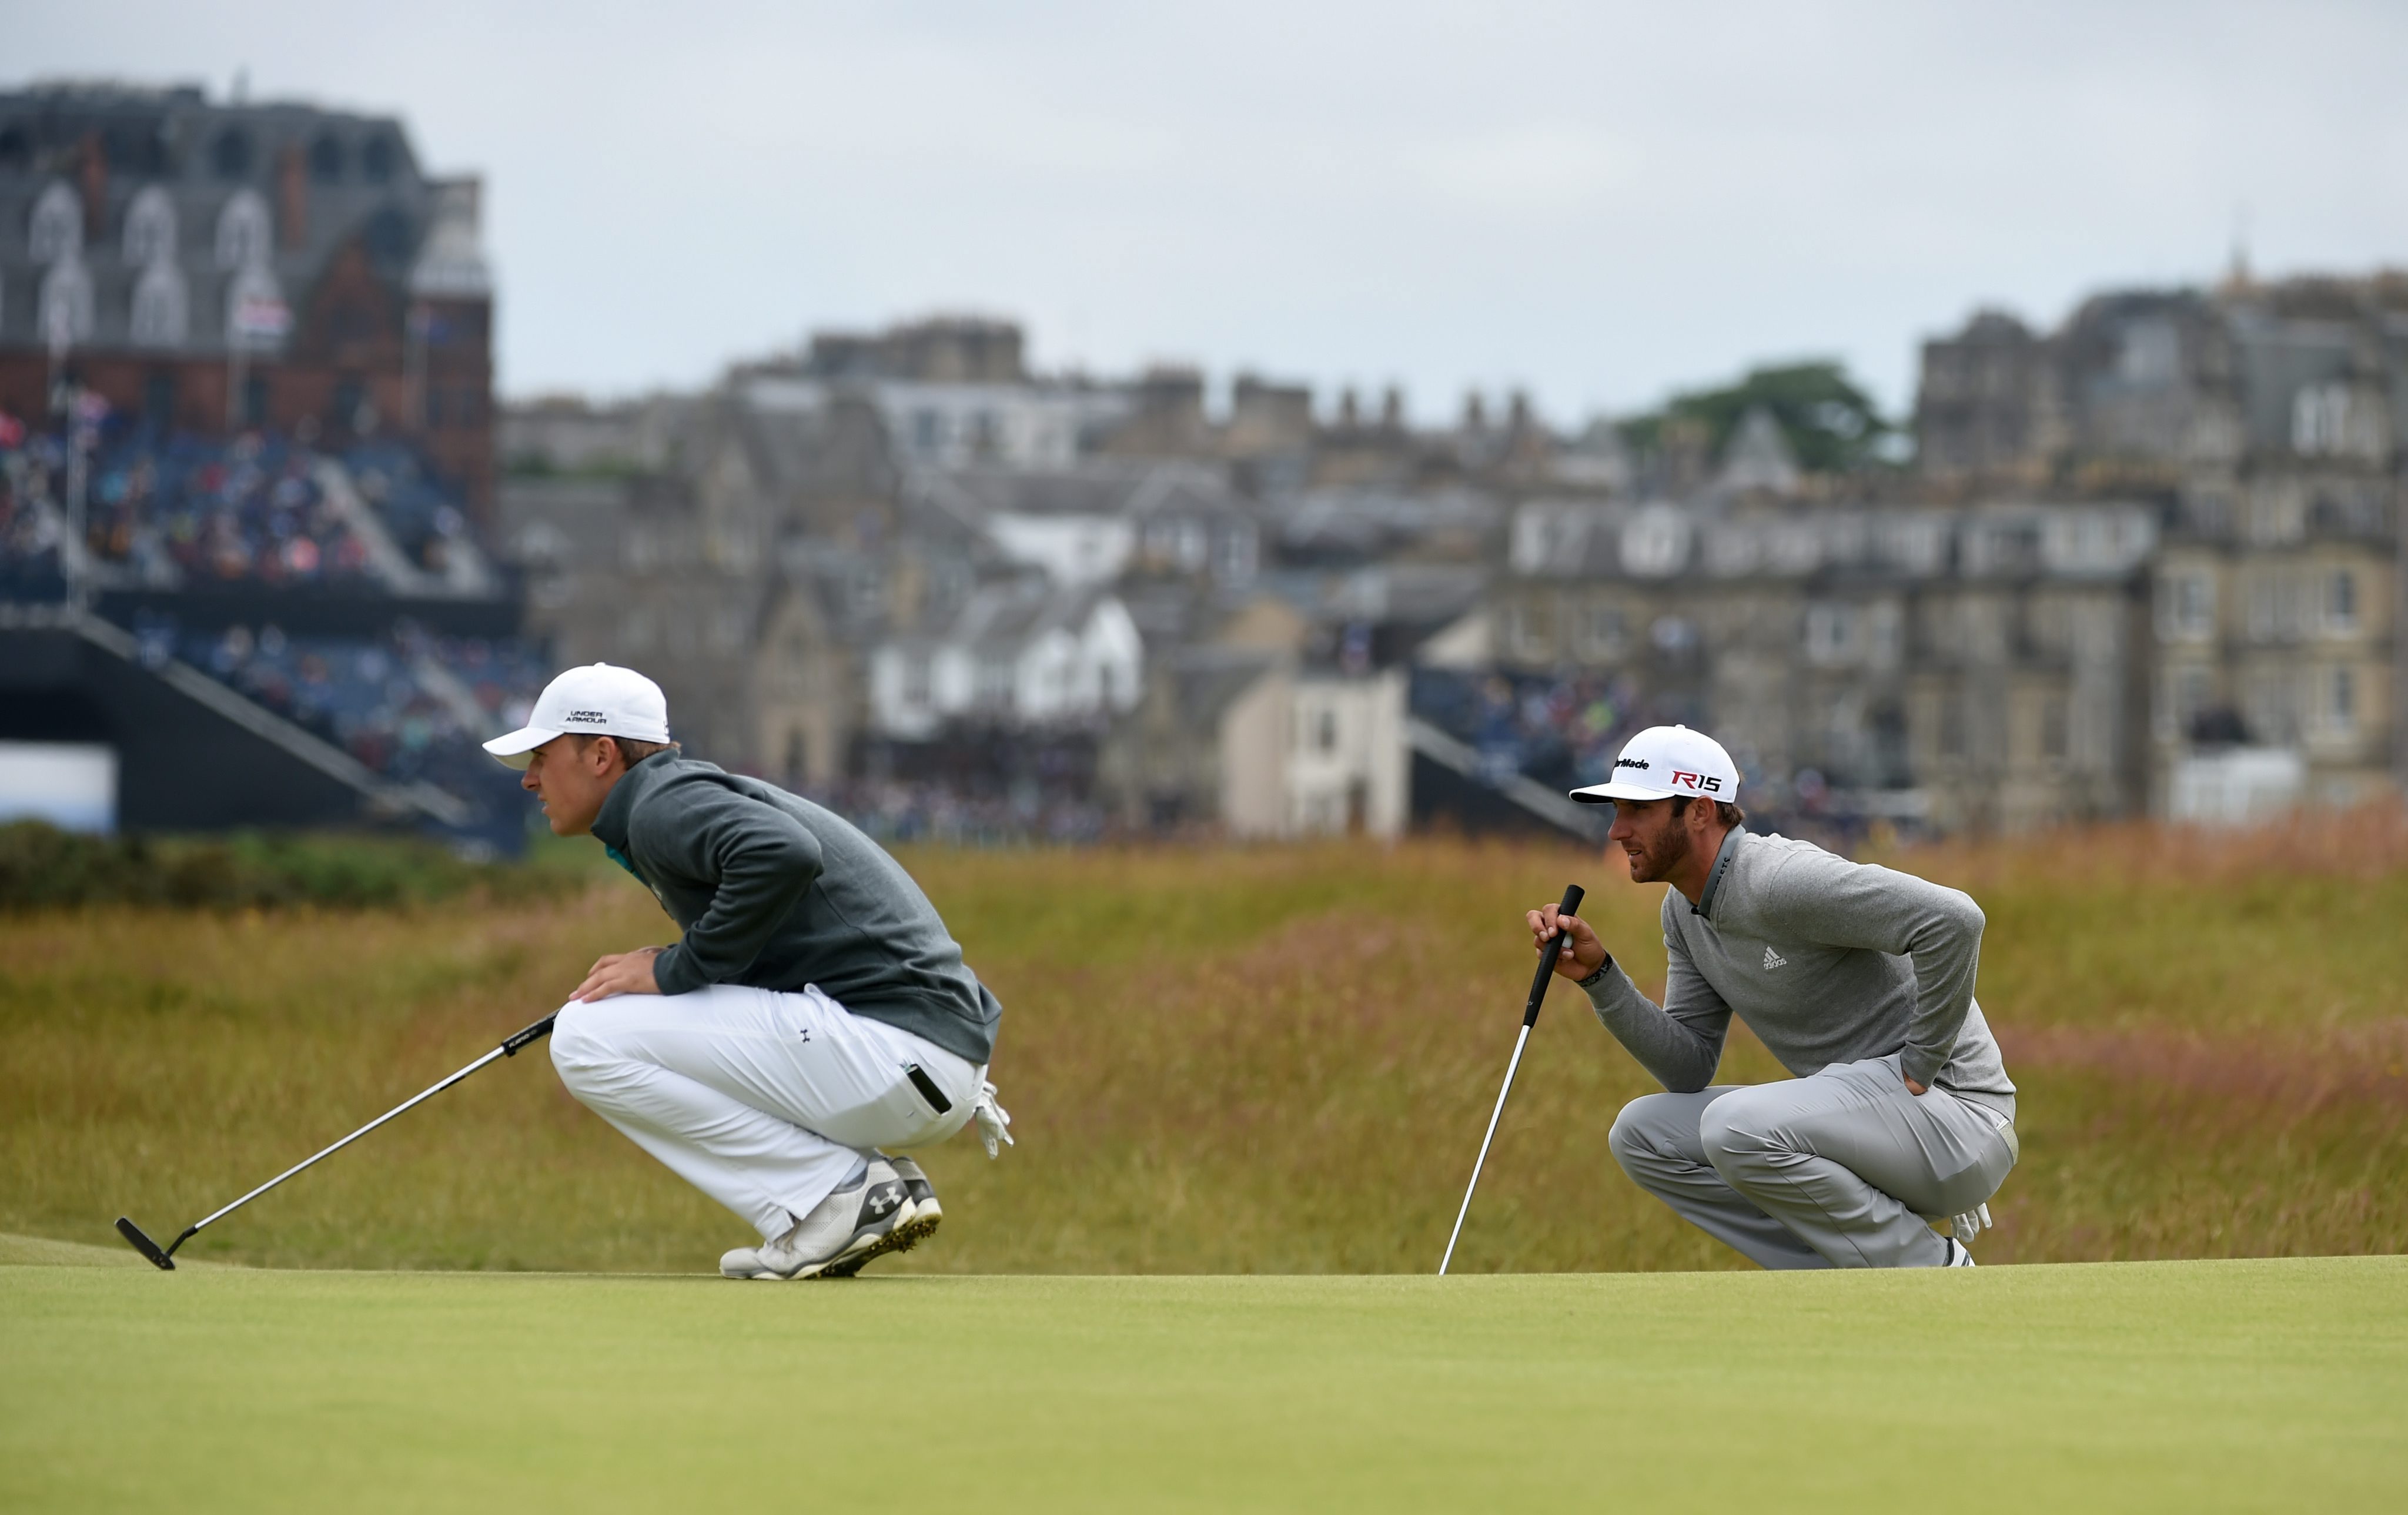 The US pairing of Dustin Johnson (right) and Jordan Spieth were the stars of the first day in Scotland. Photo: EPA